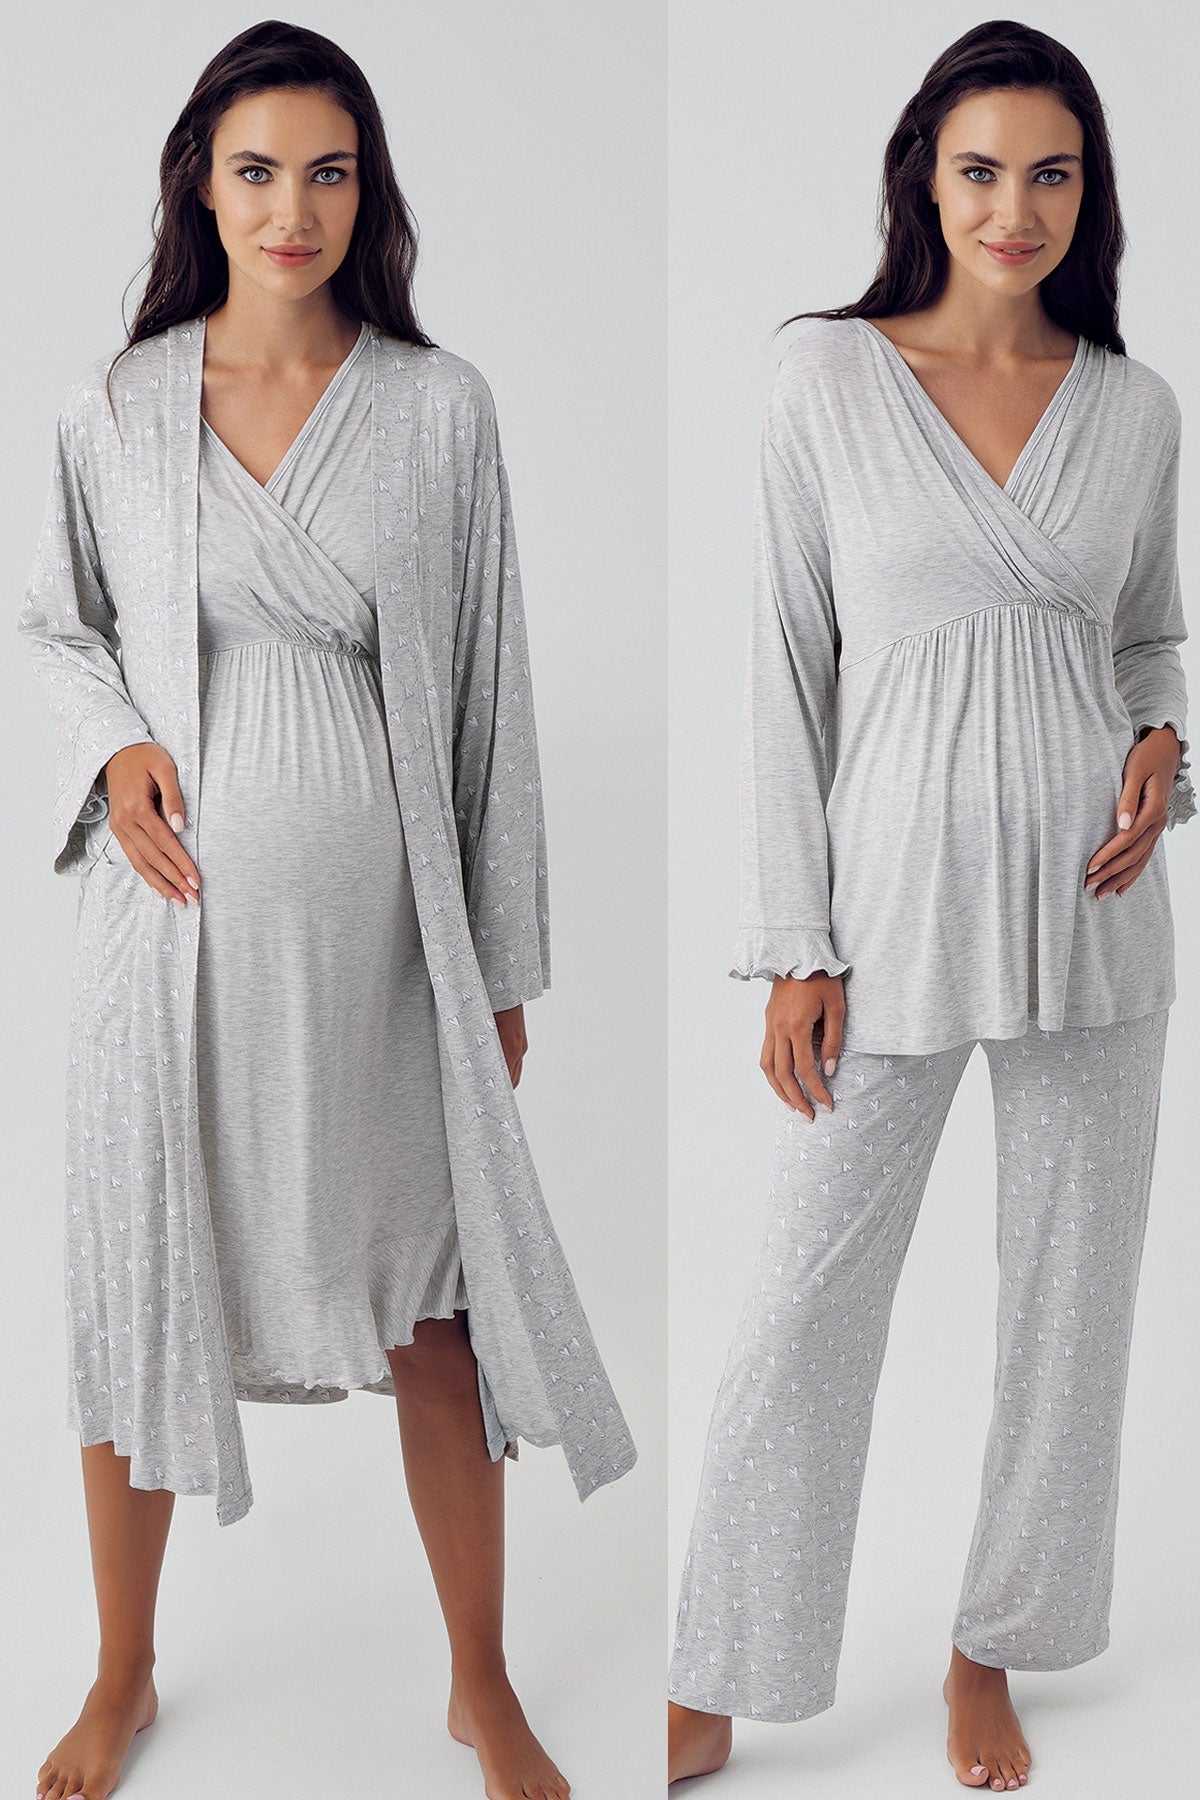 Shopymommy 402202 Polka Dot Double Breasted 4 Pieces Maternity & Nursing Set Grey